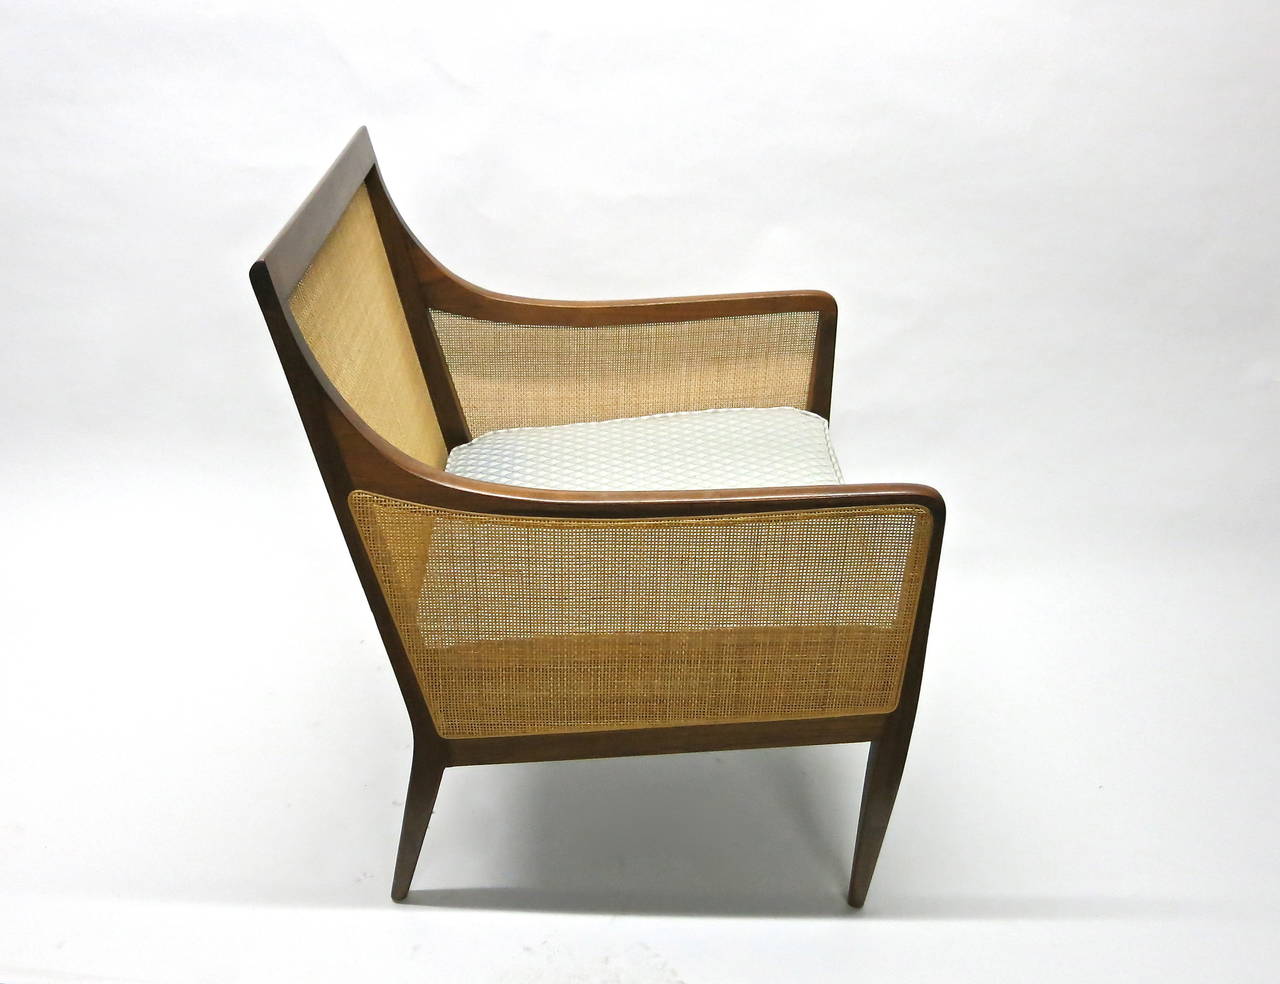 20th Century Caned Chair by Kipp Stewart for Directional, USA, circa 1955 Original Caining